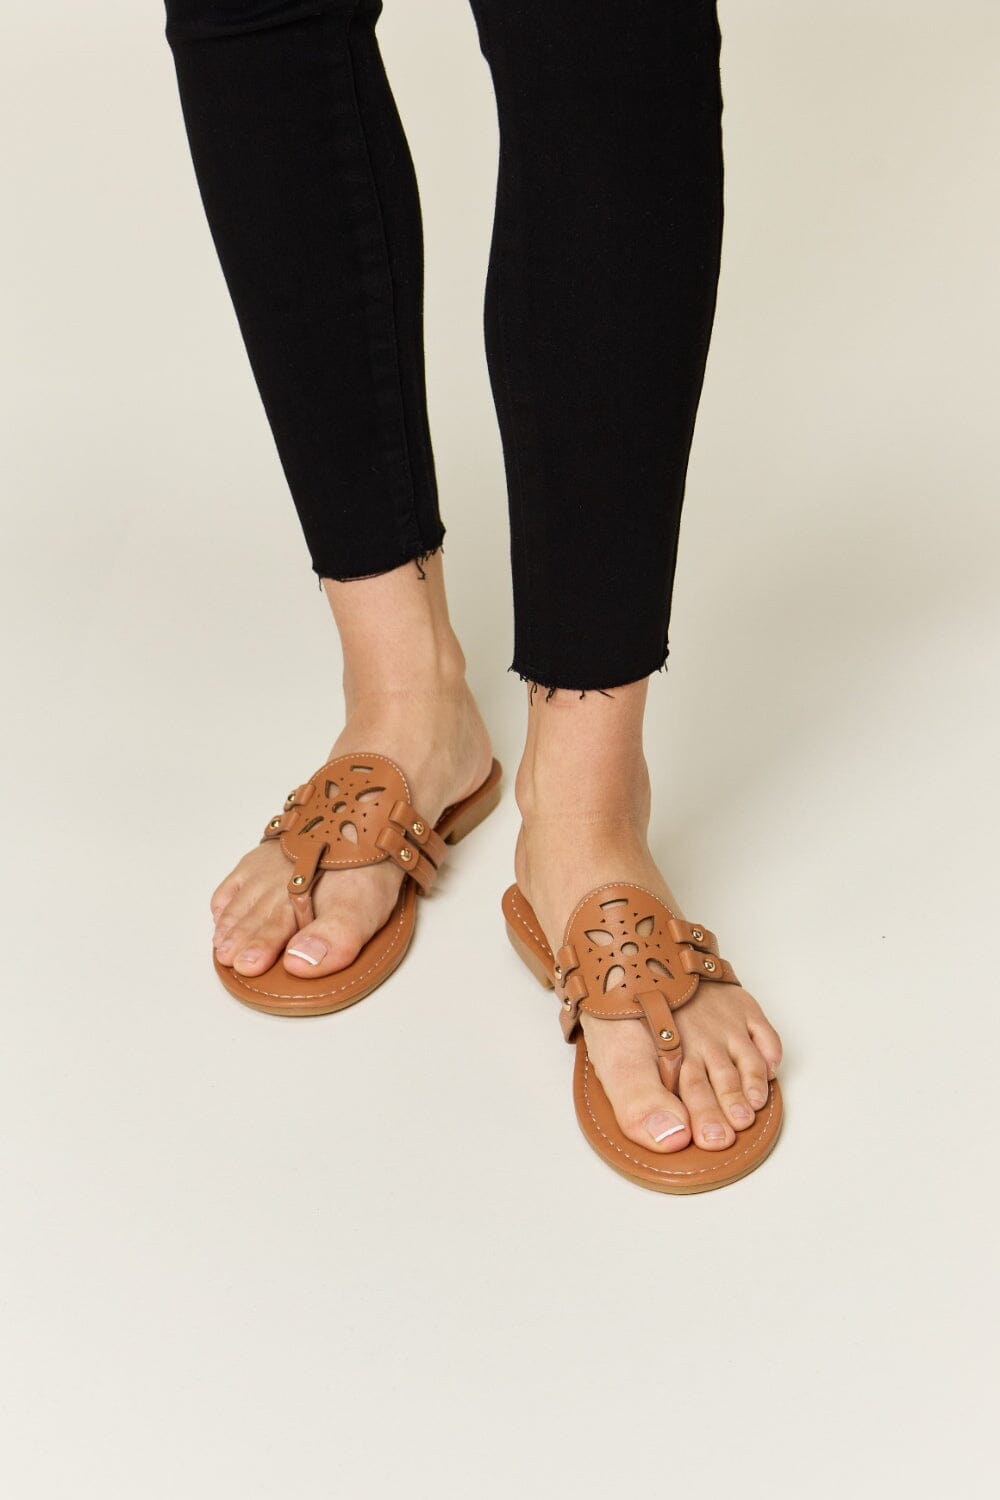 Forever Link Cutout PU Leather Open Toe Sandals - Sydney So Sweet